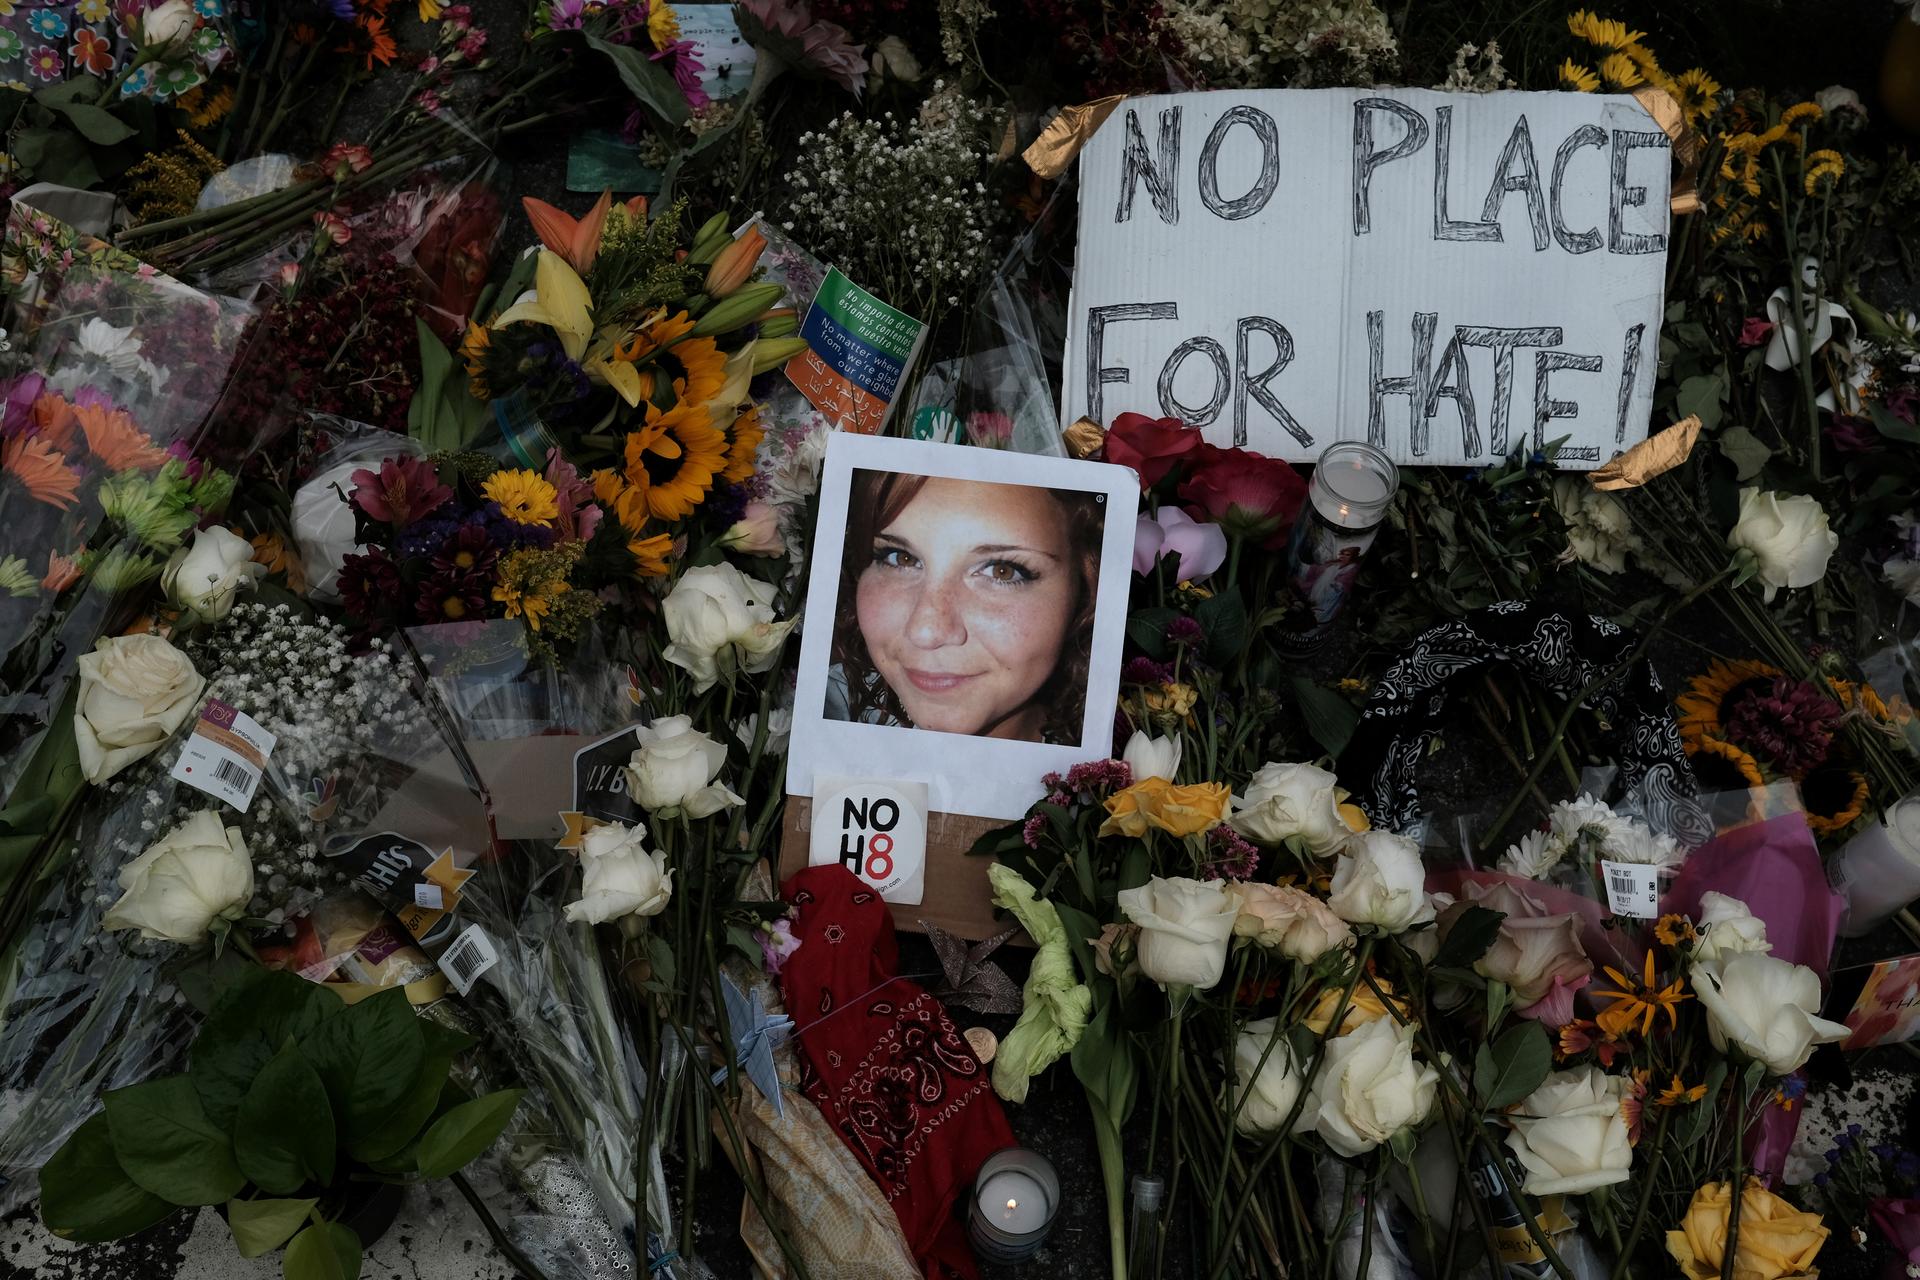 A photograph of Charlottesville victim Heather Heyer is seen amongst flowers left at the scene of the car attack on a group of counter-protesters that took her life during the "Unite the Right" rally in Charlottesville, Virginia, August 14, 2017.